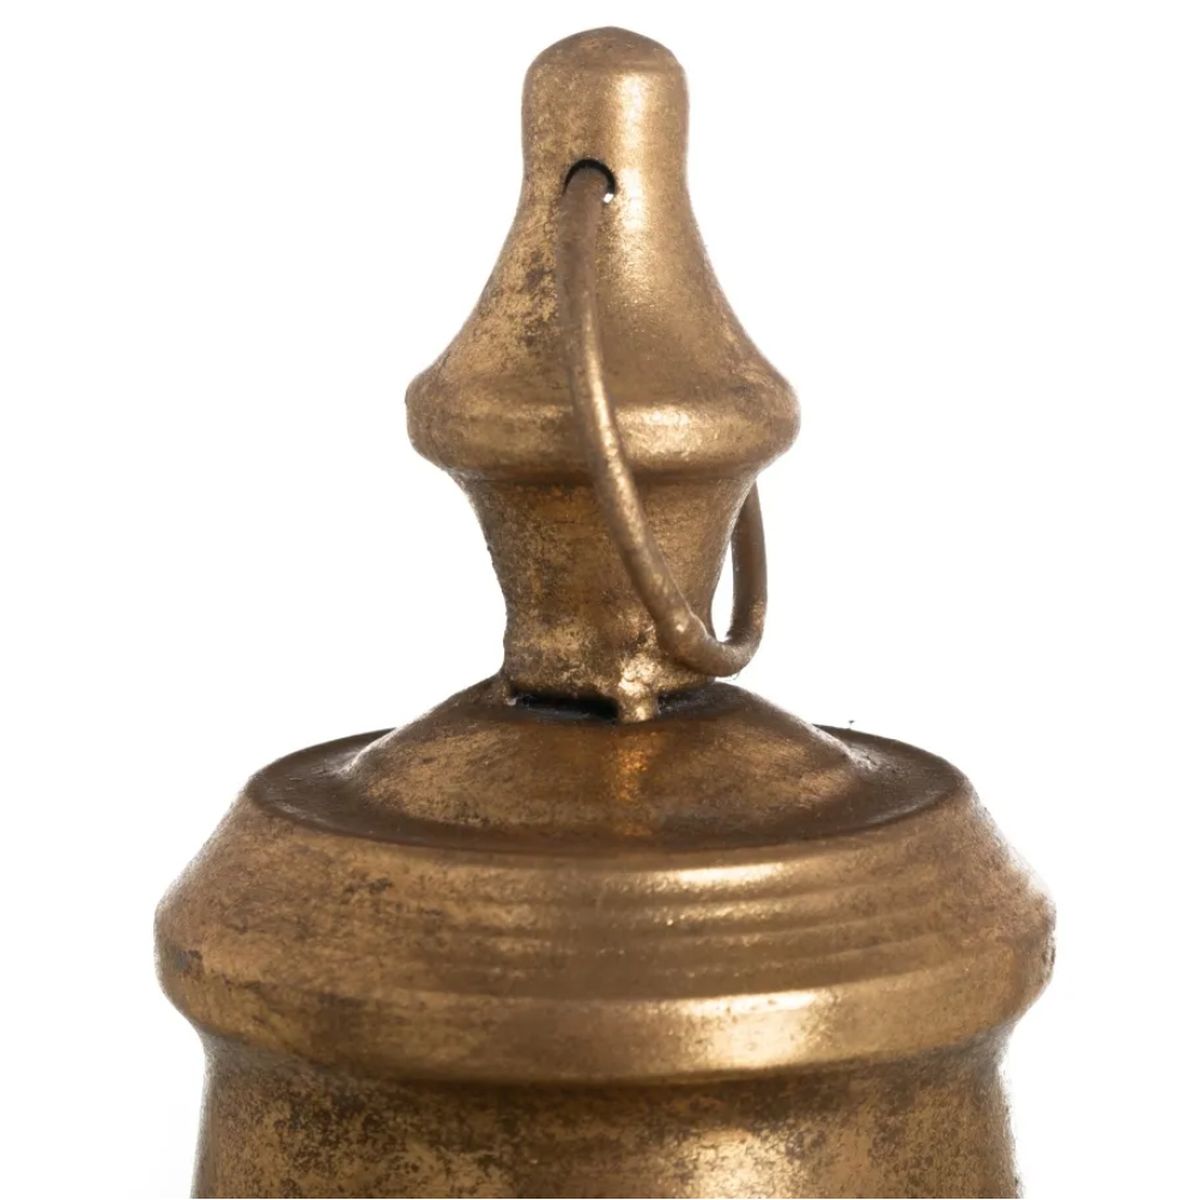 Large decorative bell in gold metal